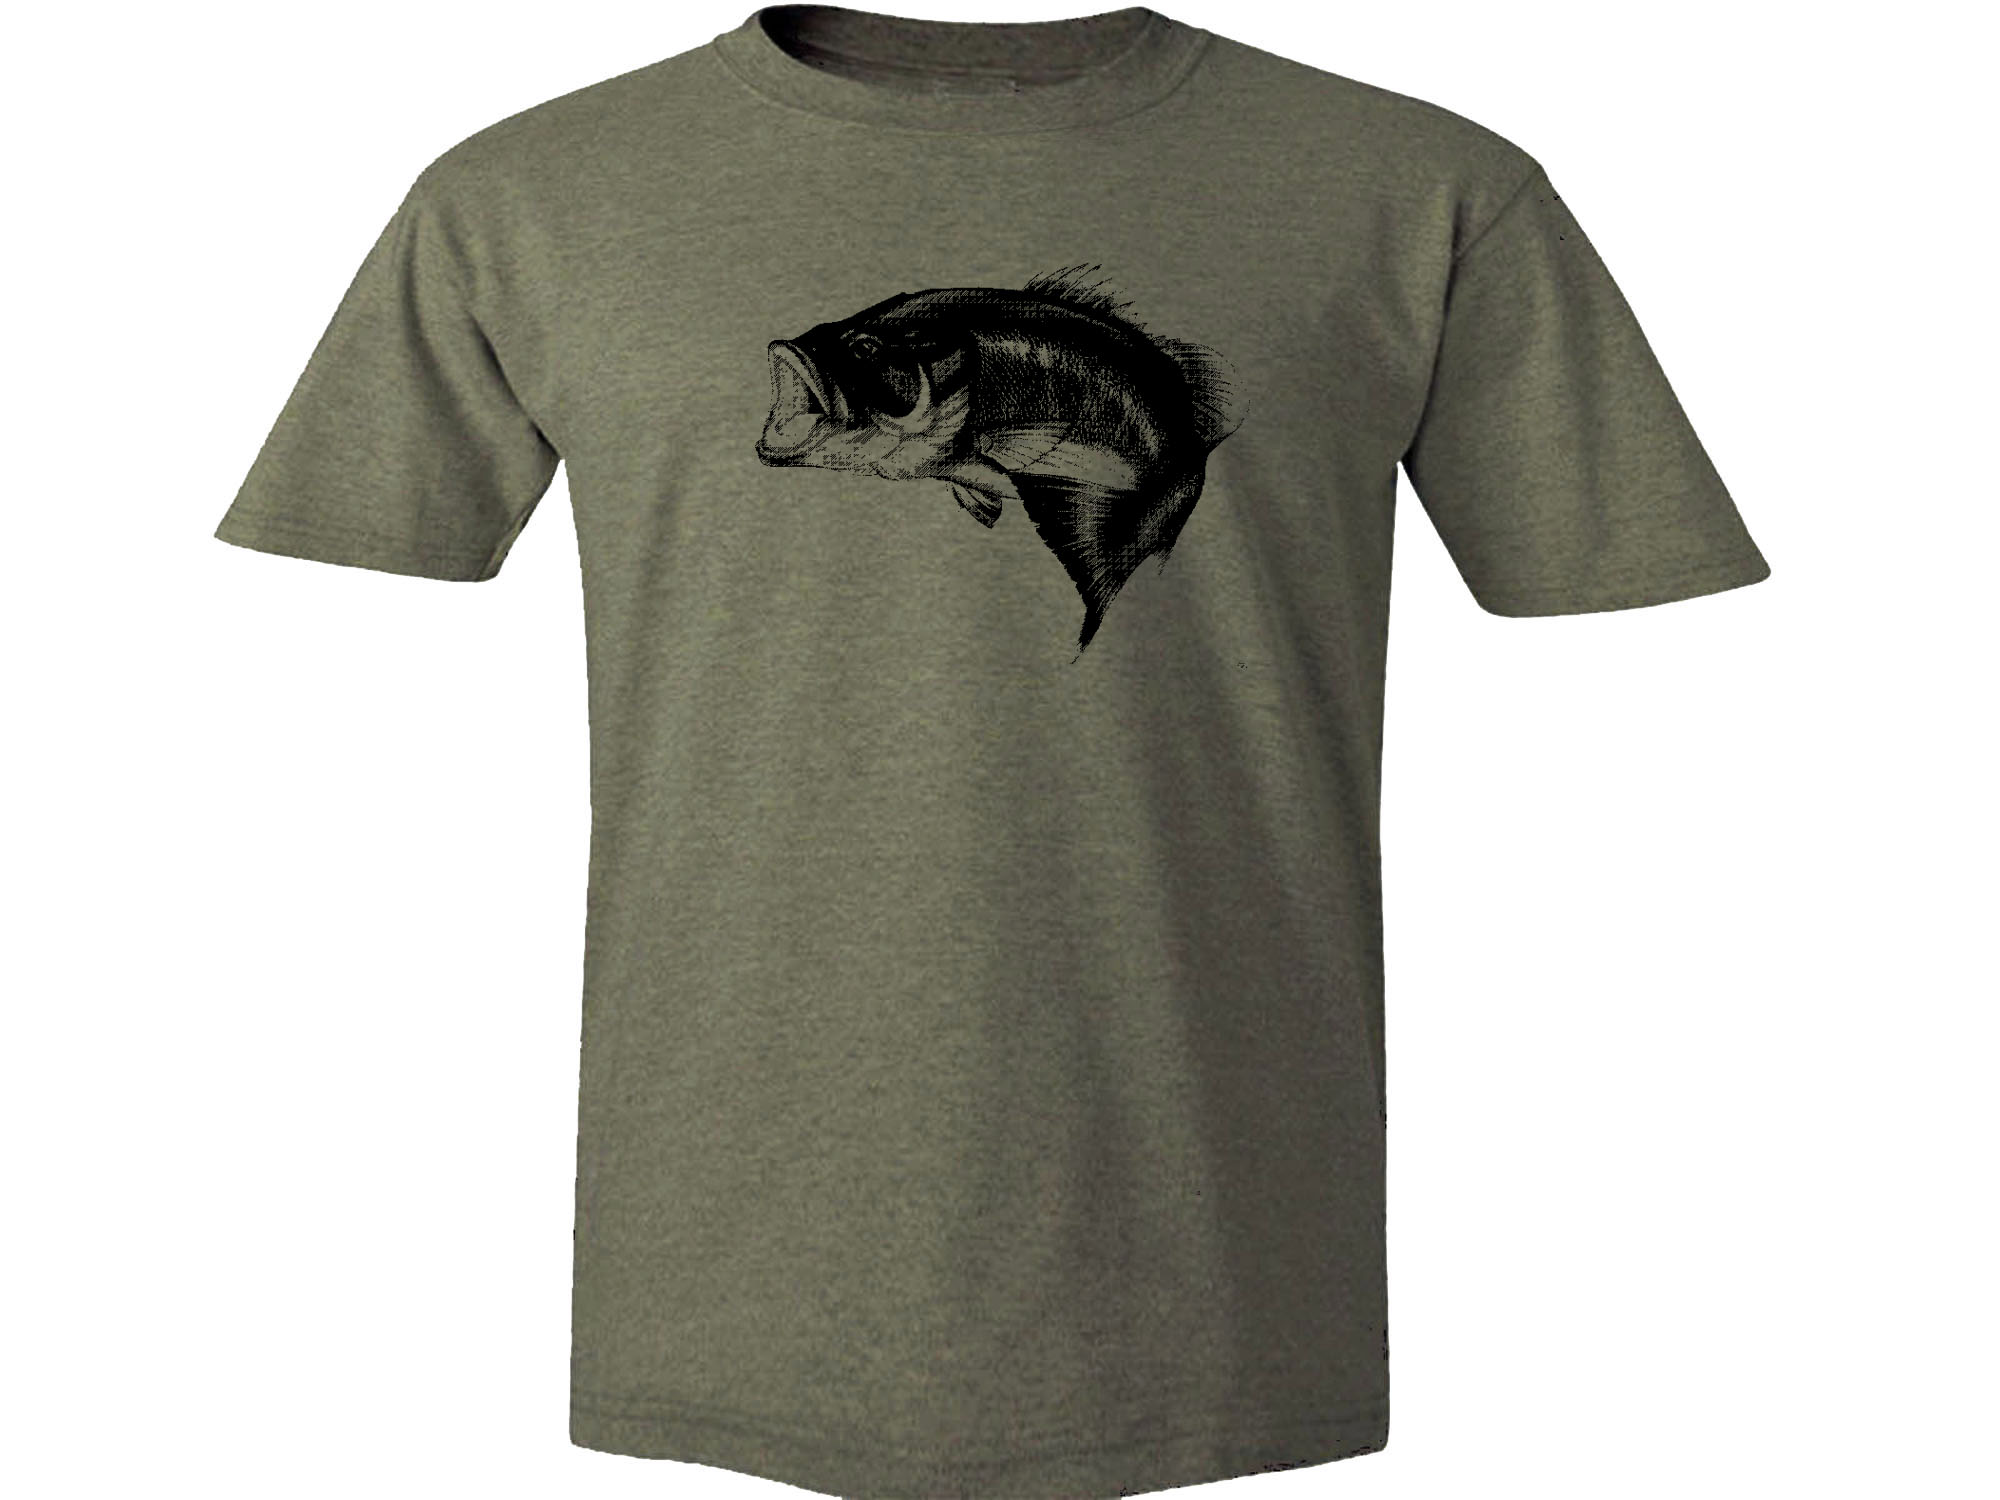 Bass fish picture graphic camel color t-shirt-Fishing gifts